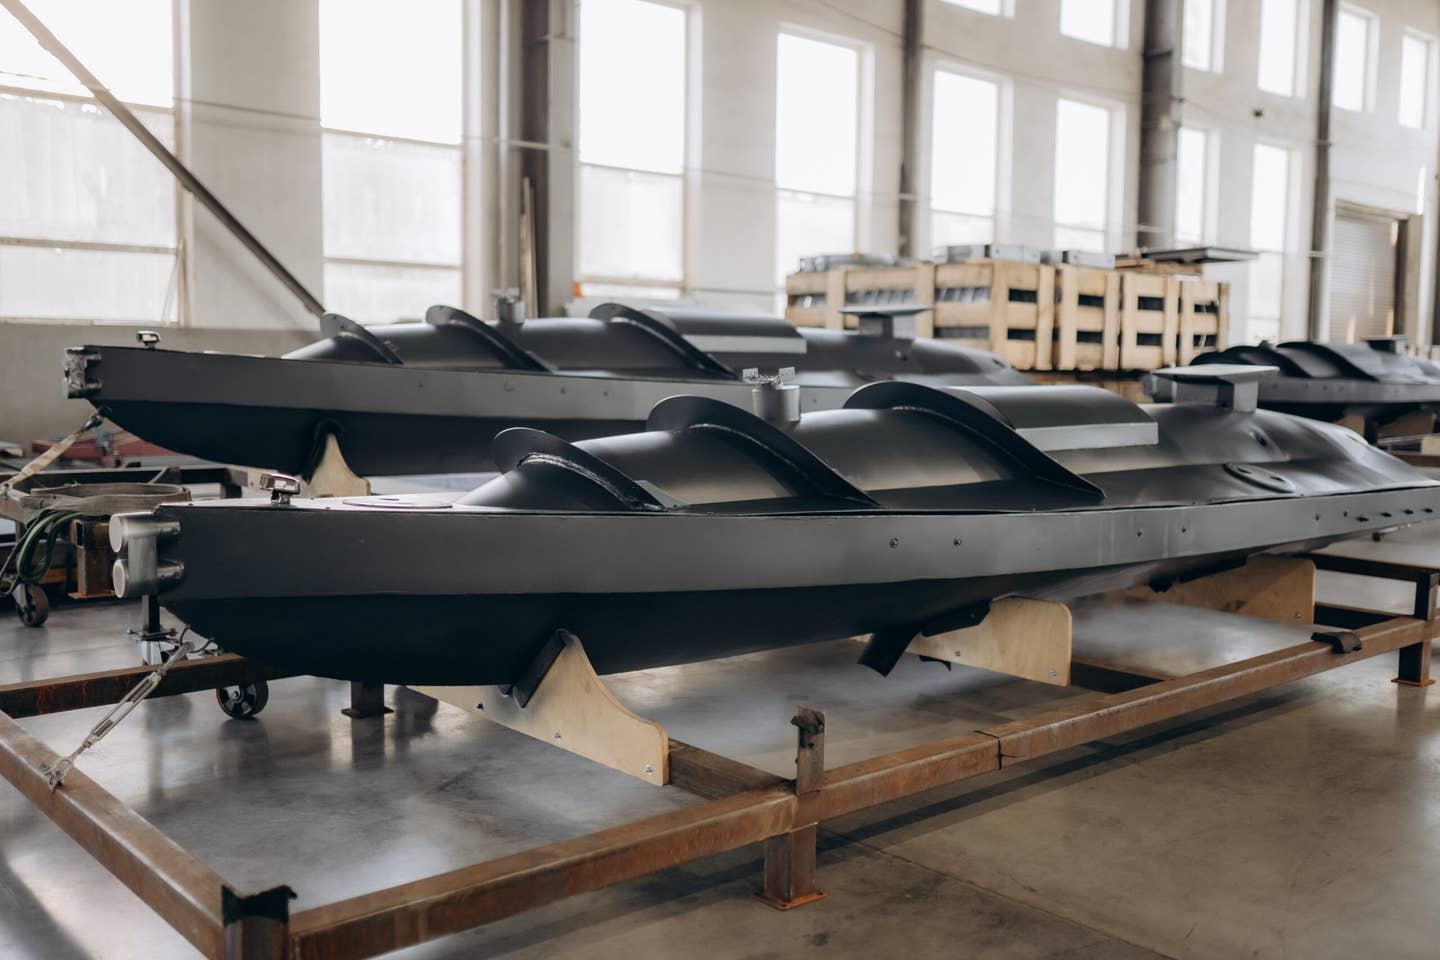 Some of the Ukrainian USVs currently under construction. (UNITED24 photo)